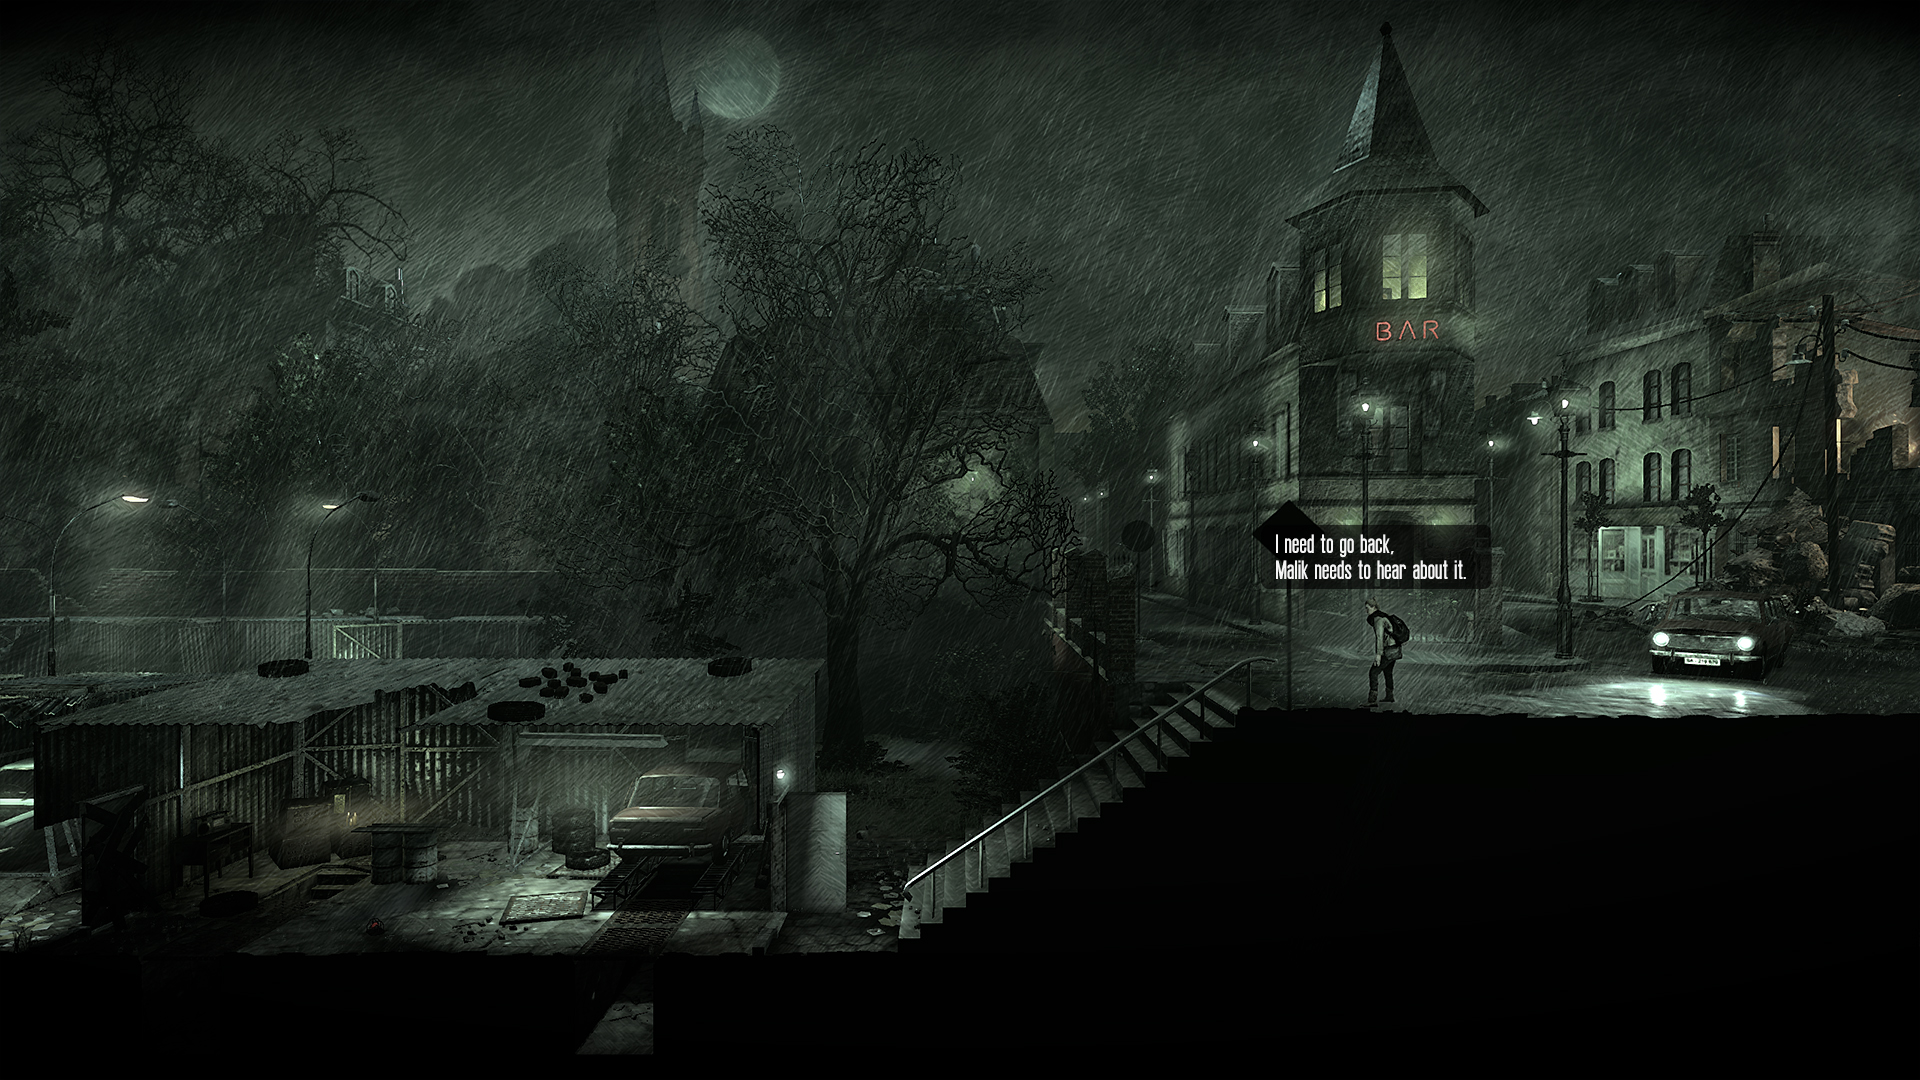 In November, this War Of Mine will receive a major addition to The Last Broadcast